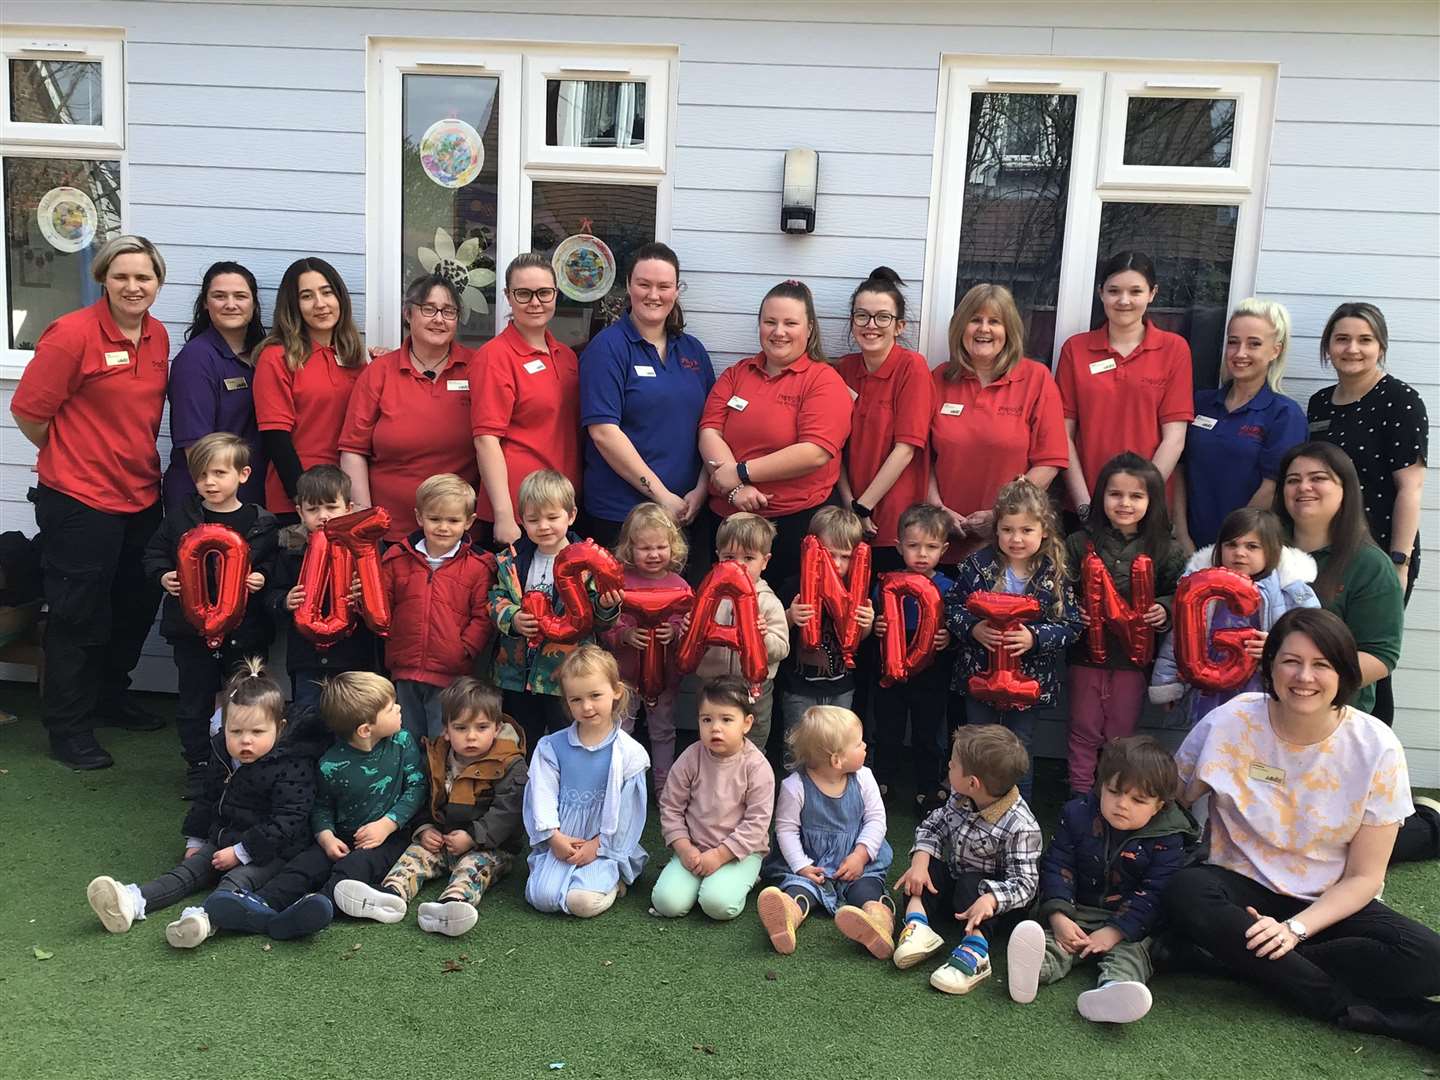 Poppy's Day Nursery in Staplehurst has been graded 'outstanding' by Ofsted